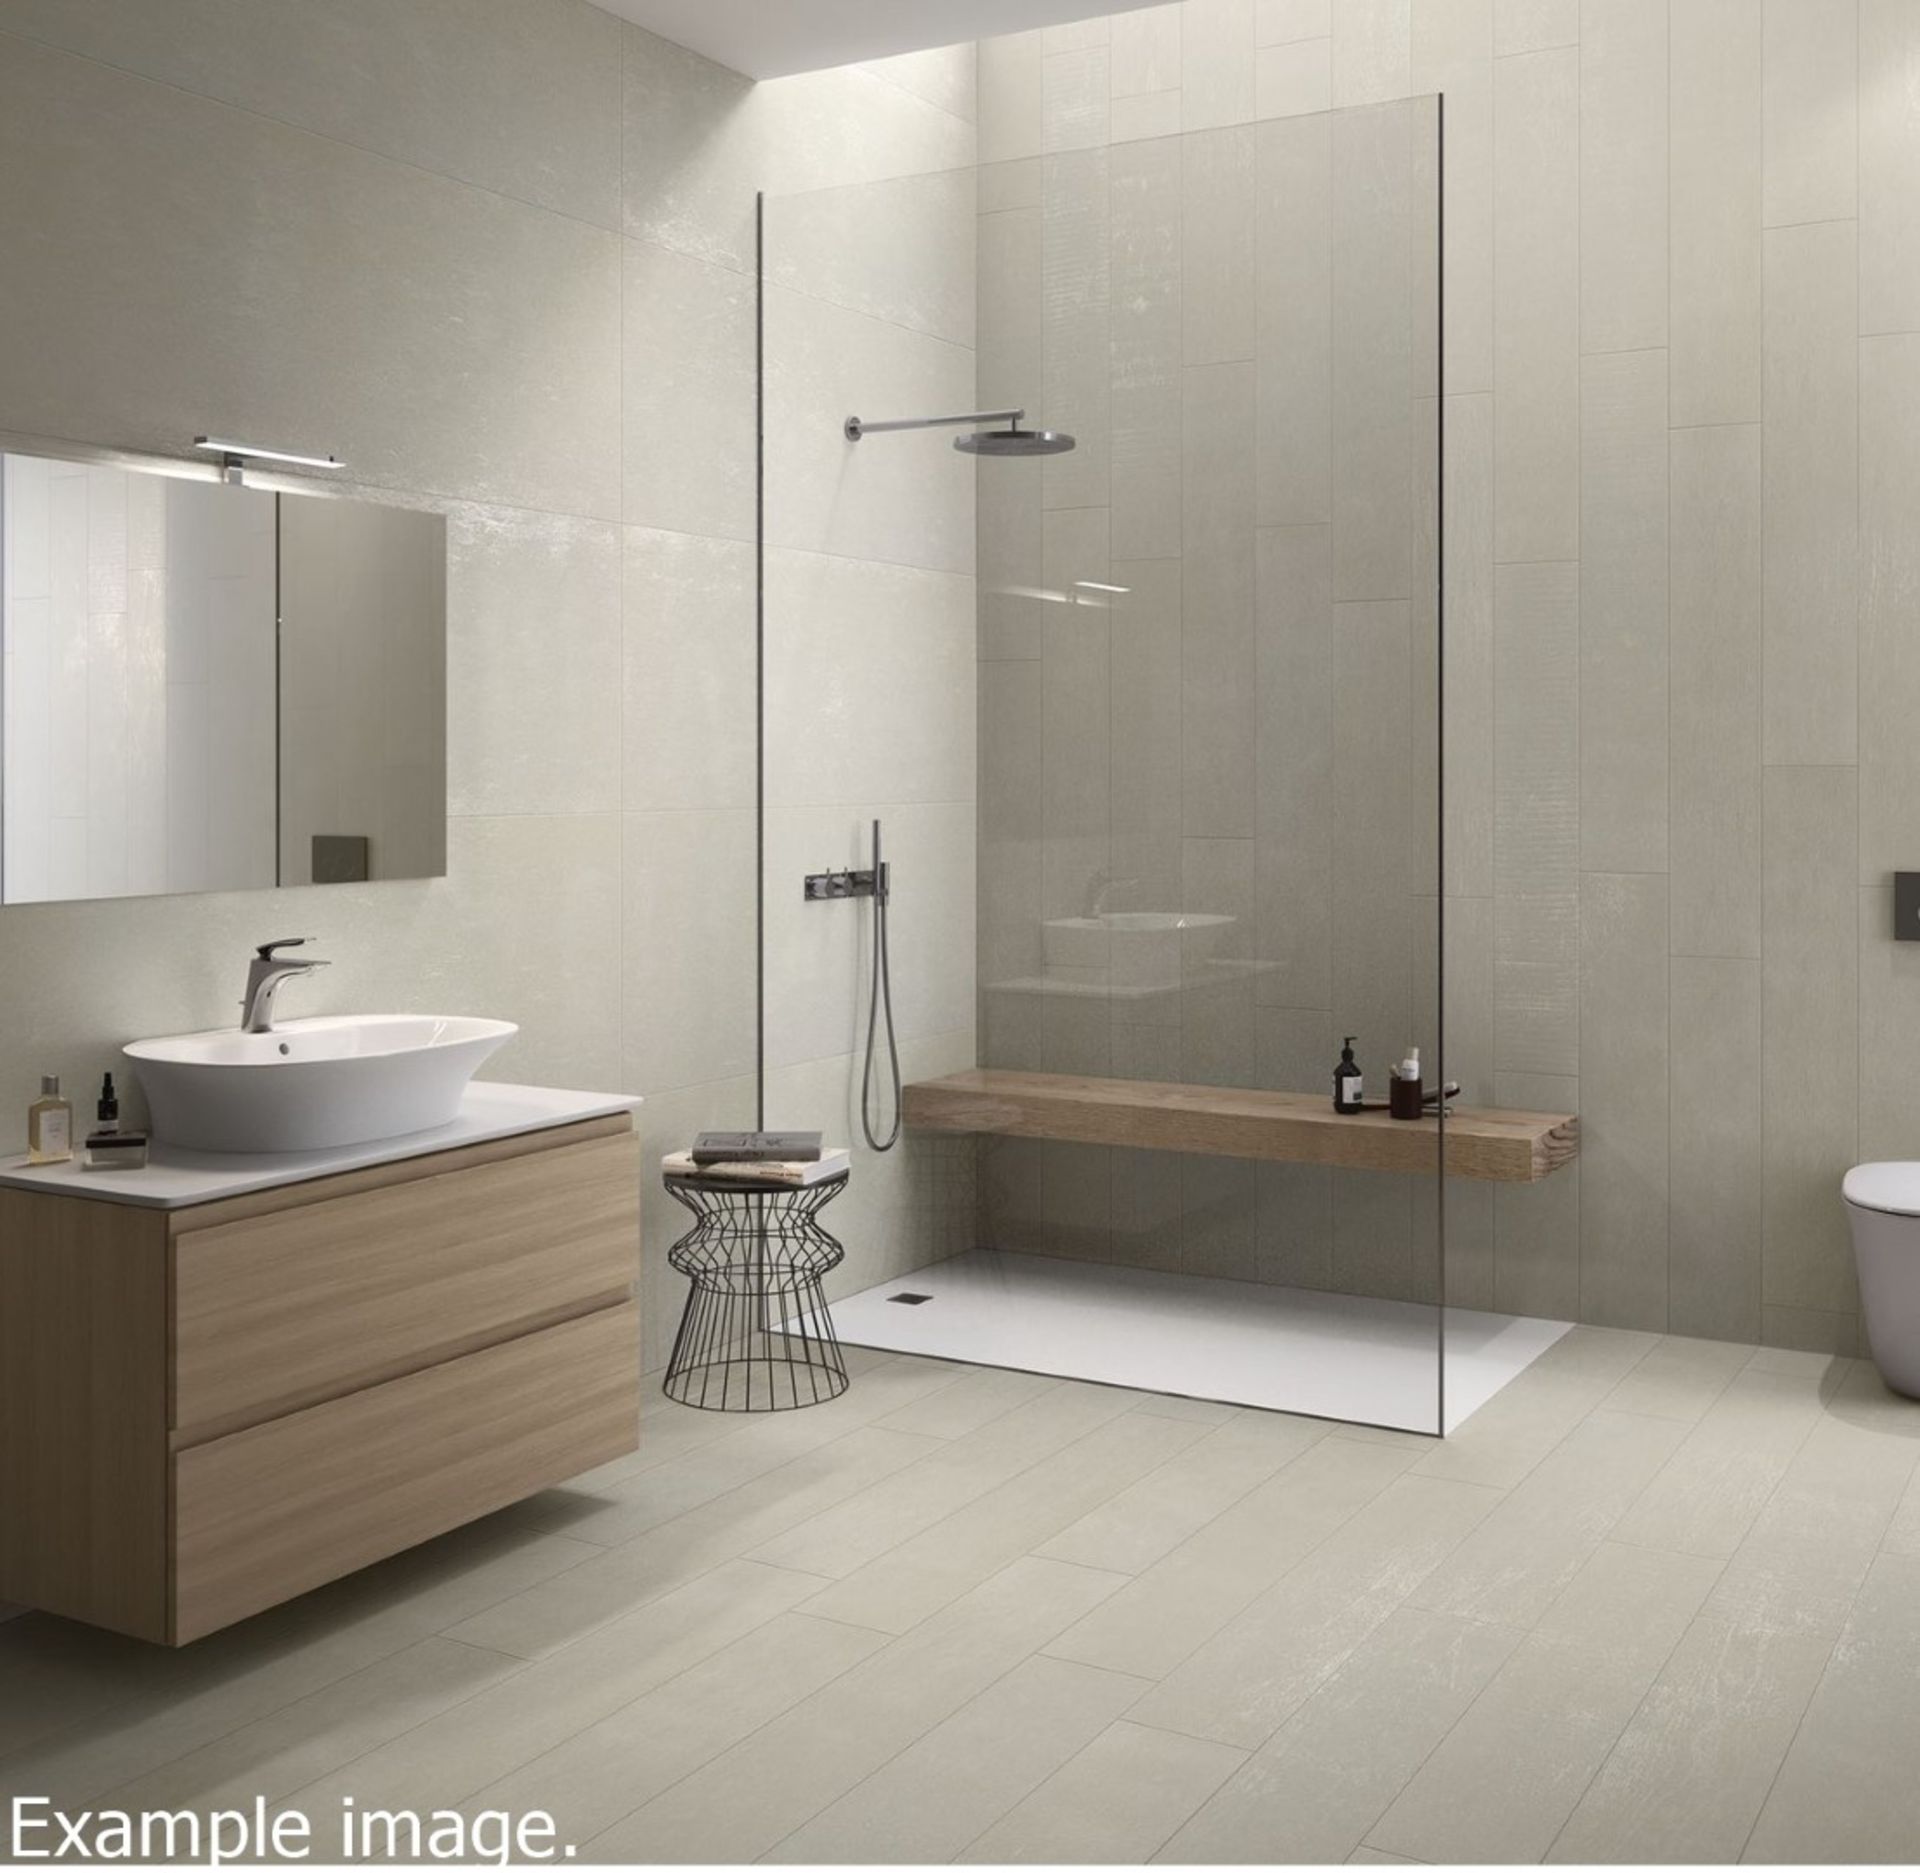 12 x Boxes of RAK Porcelain Floor or Wall Tiles - M Project Wood Design in Light Grey - 19.5 x 120 c